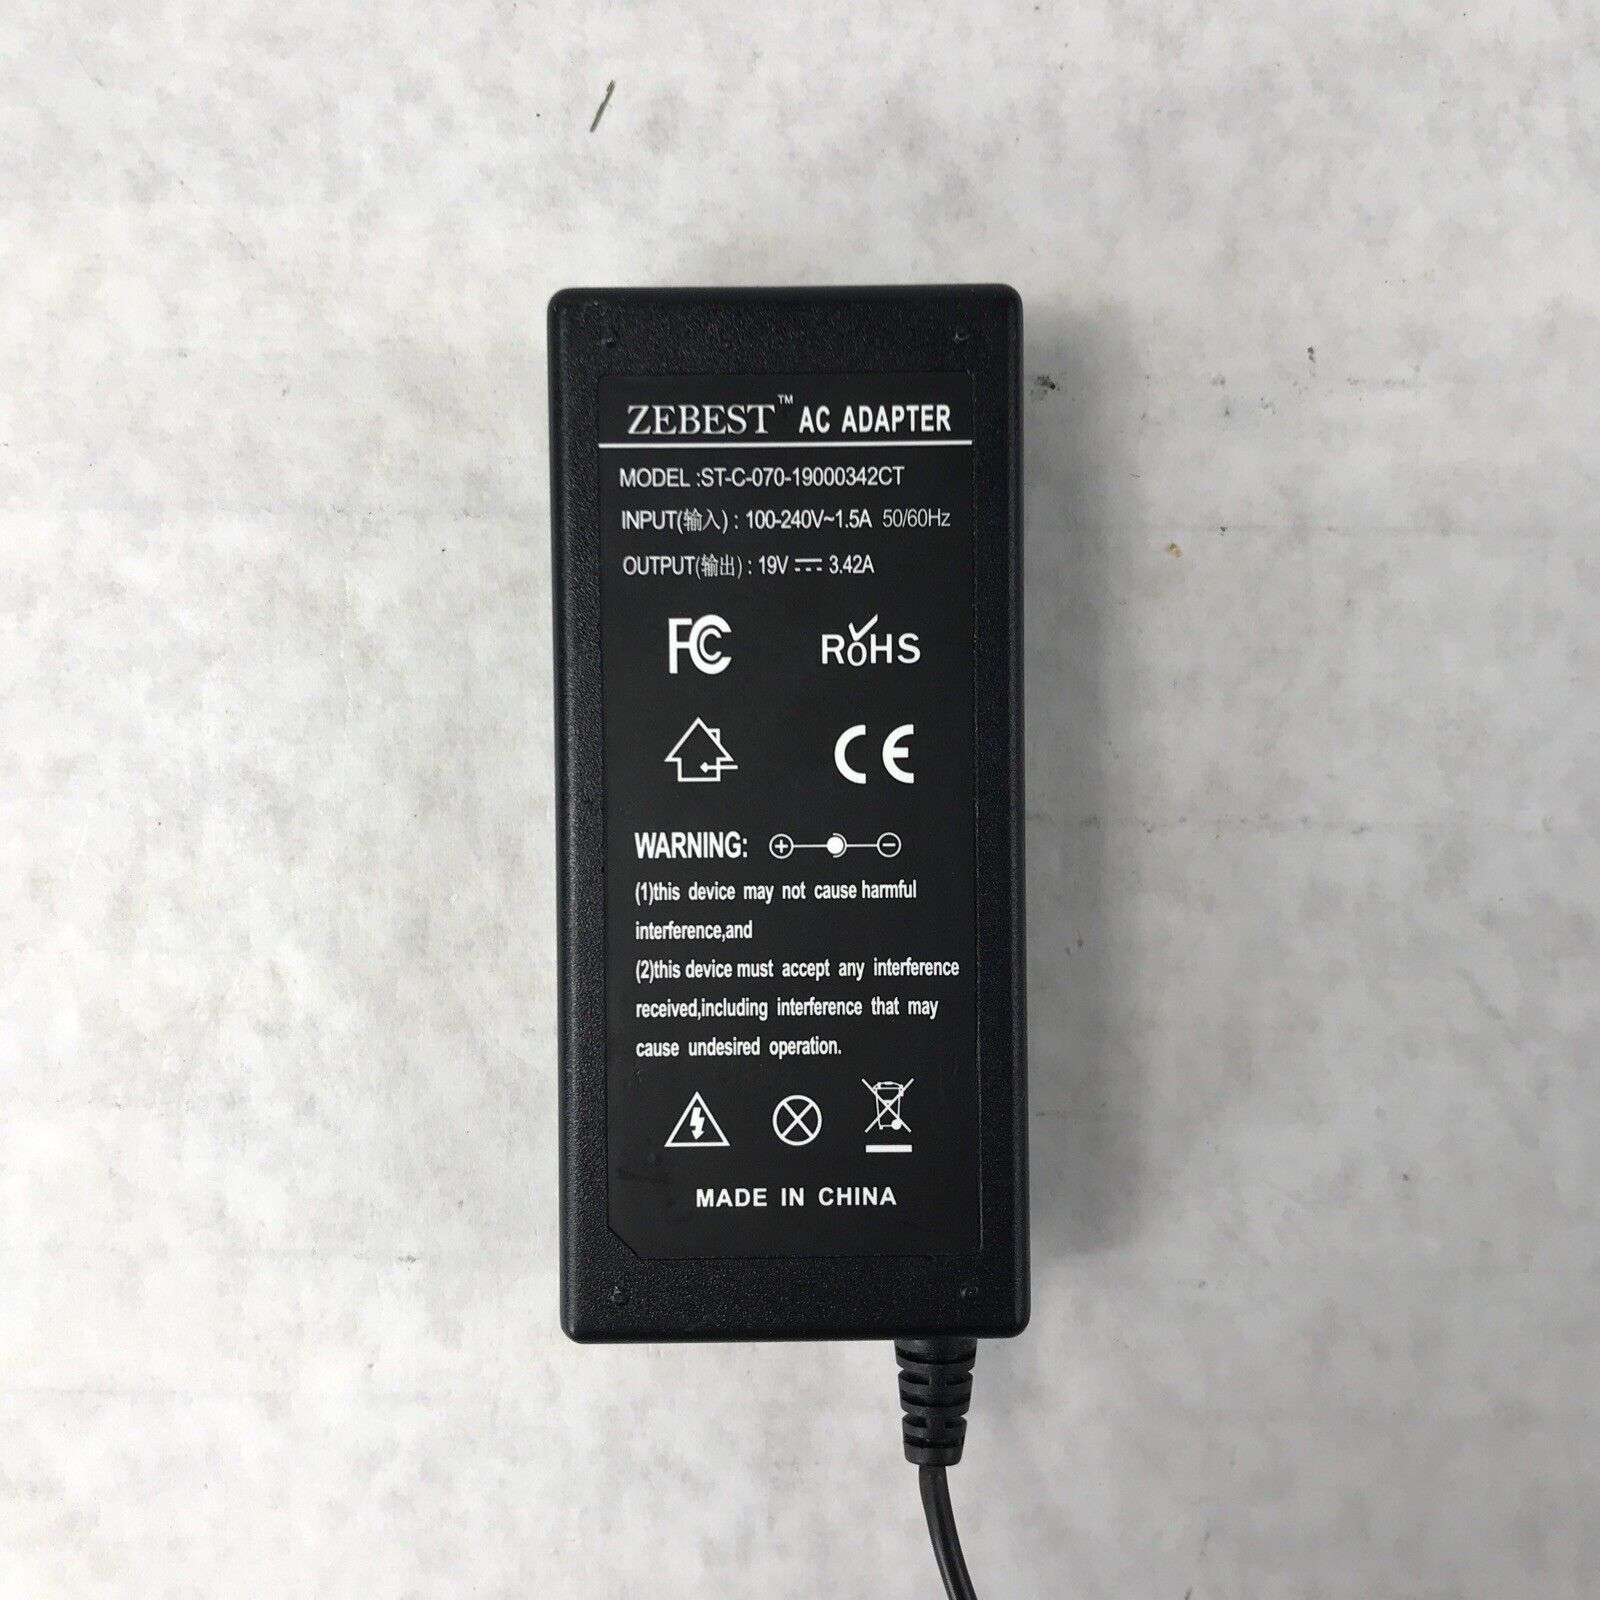 Zebest 65W AC Adapter for Acer ST-C-070-19000342CT Laptop Charger